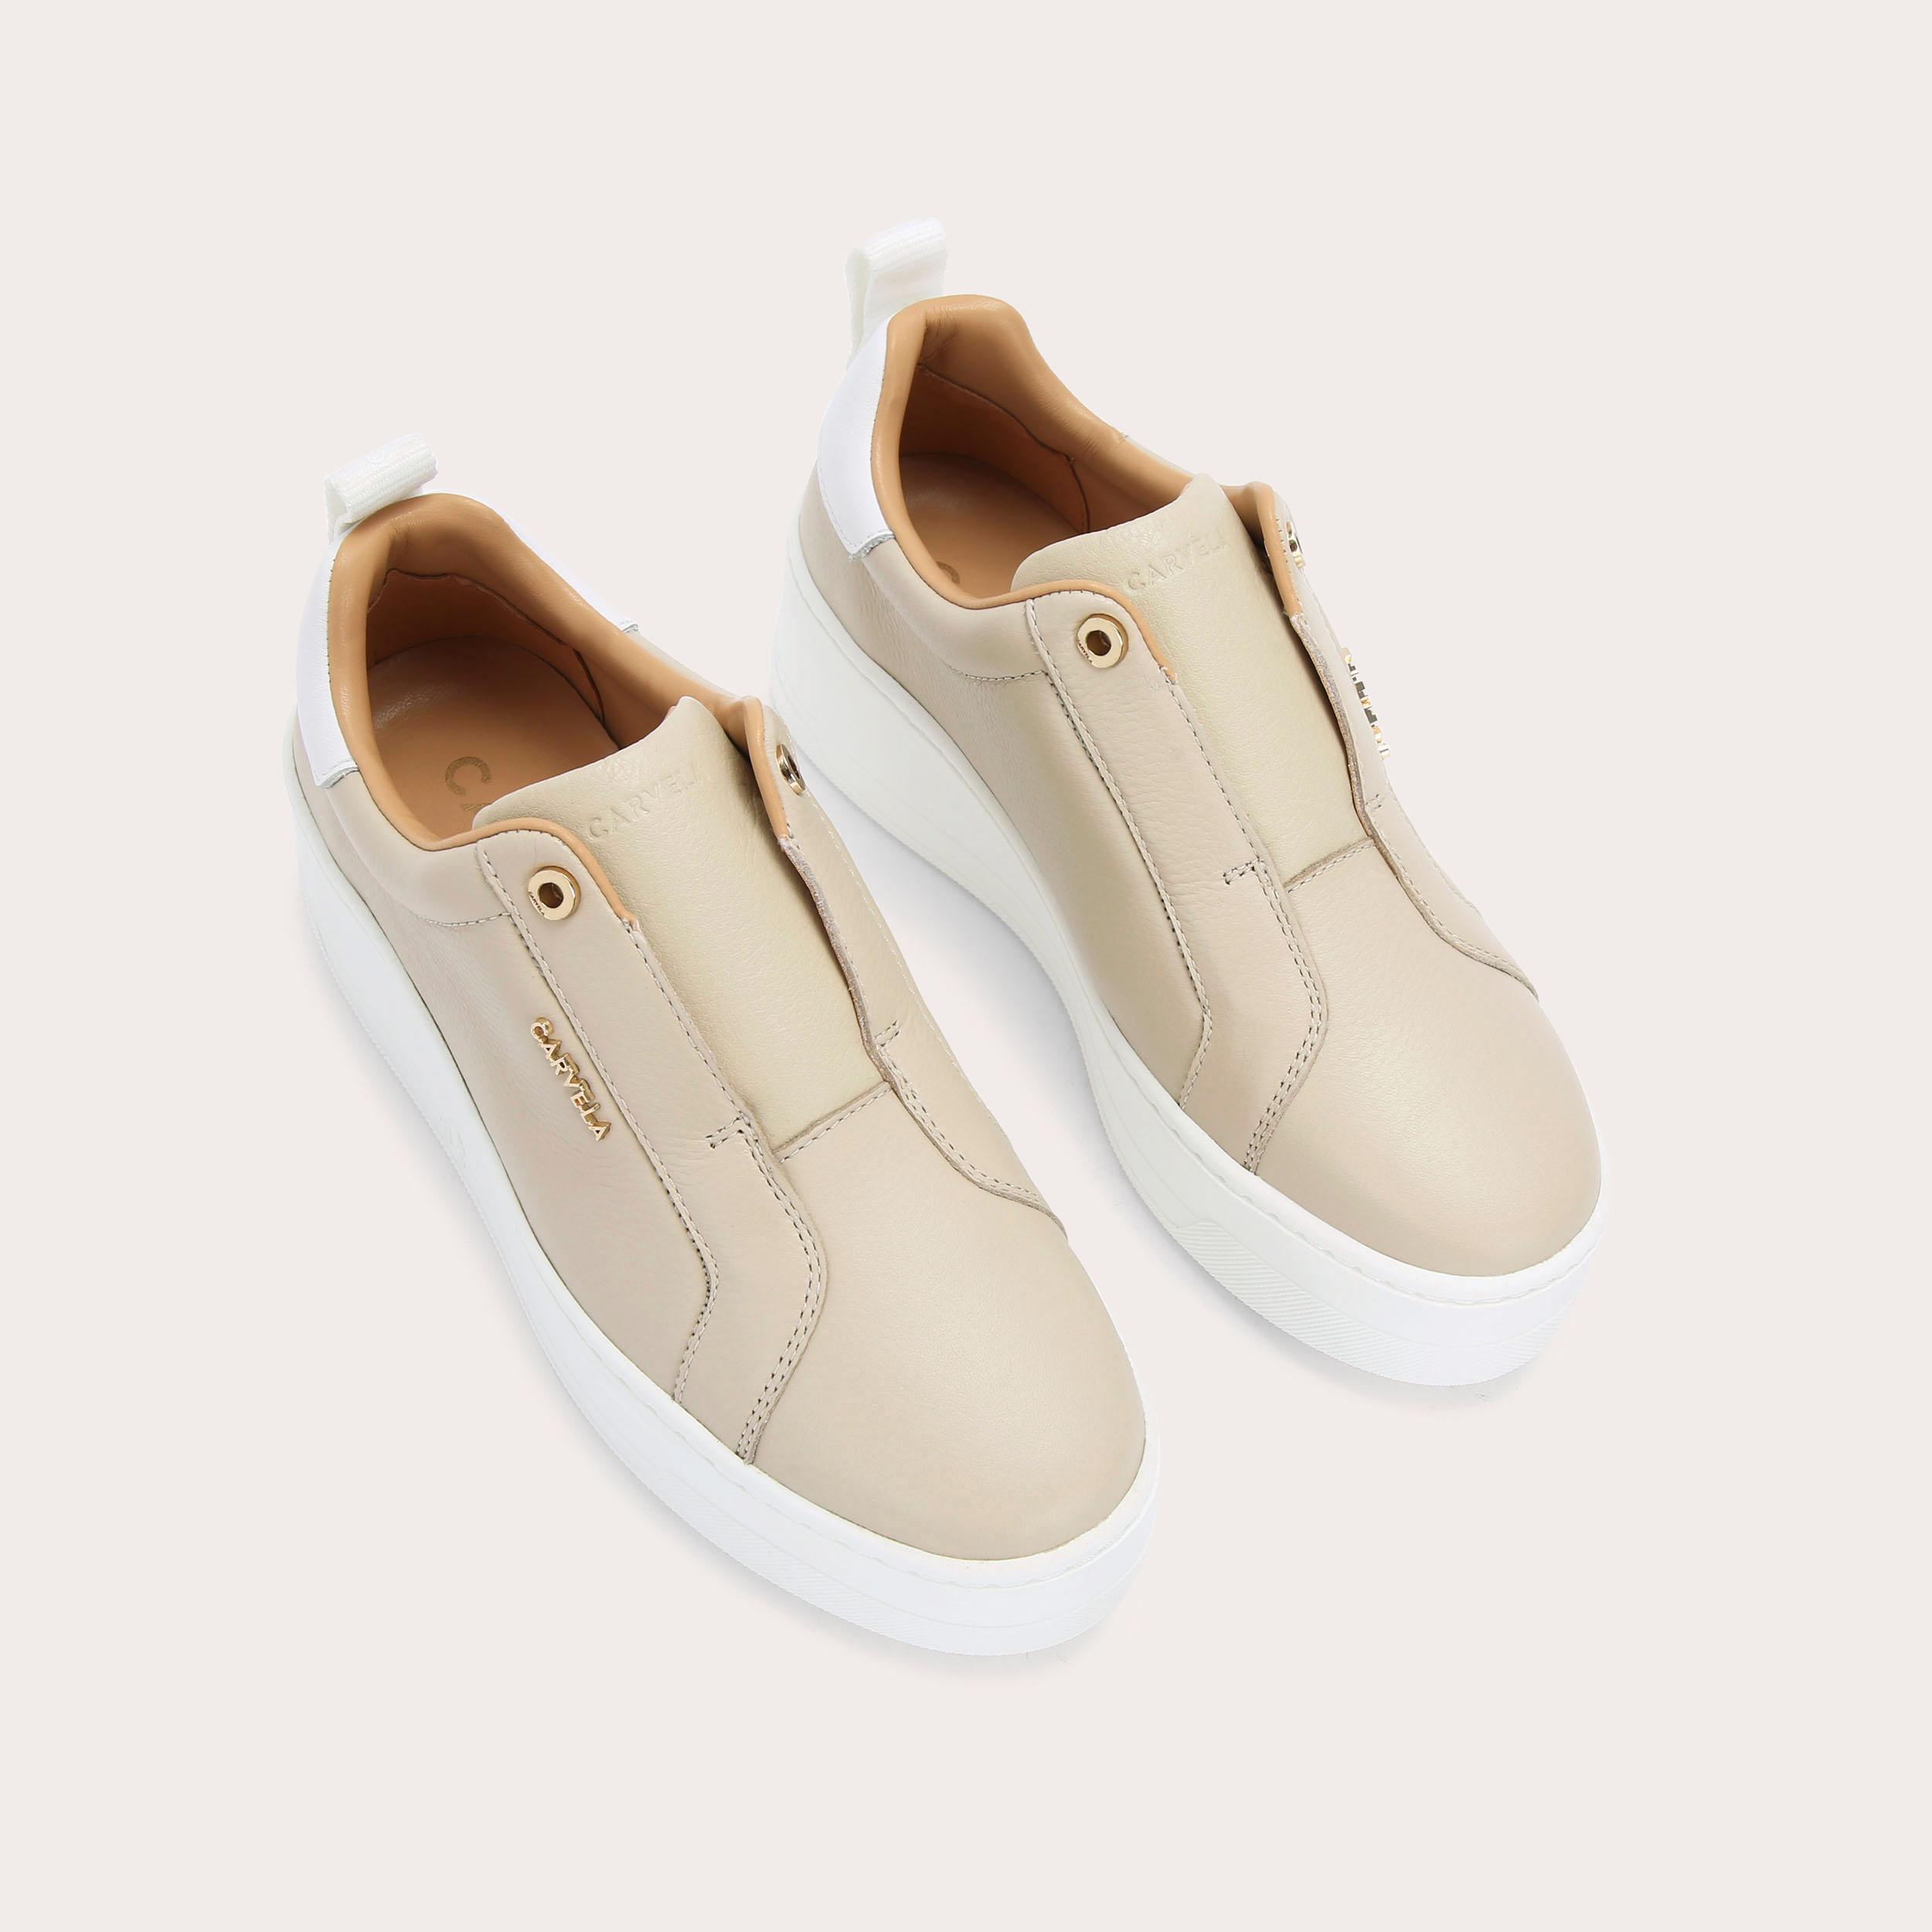 CONNECTED LACELESS Taupe Leather Trainers by CARVELA